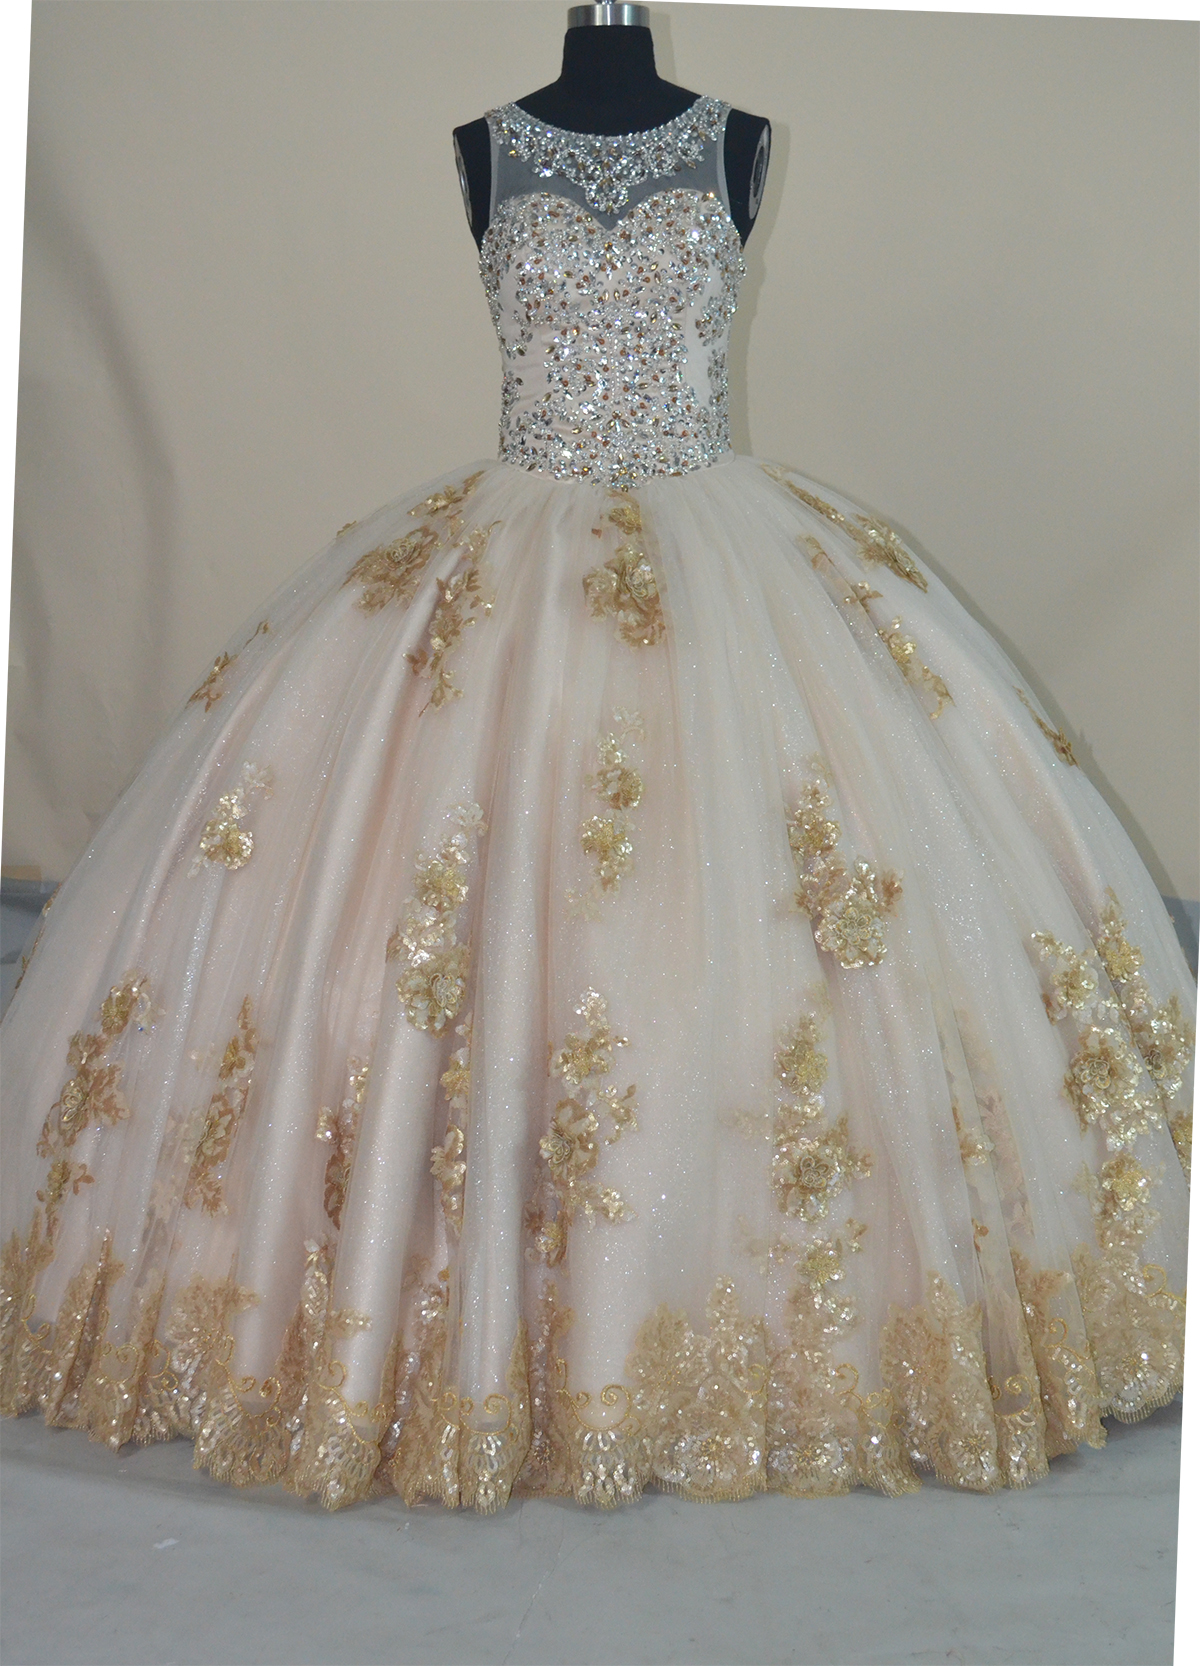 Designer Same Style Scoop Full Beading Bodice 3D Applique Quince Ball Gown Champagne - Click Image to Close